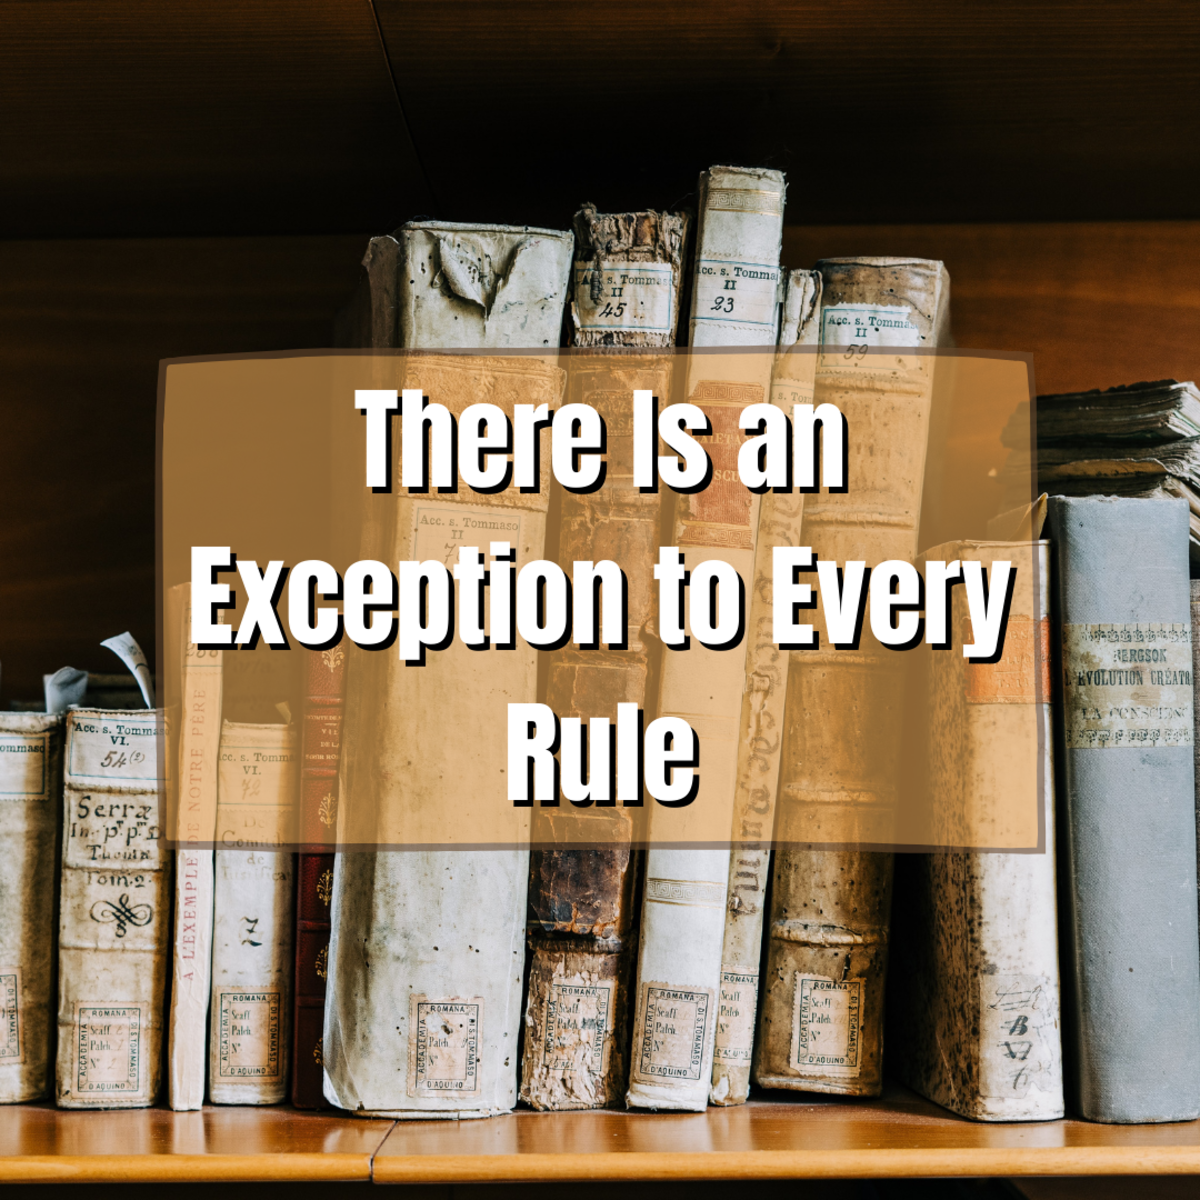 There Is an Exception to Every Rule